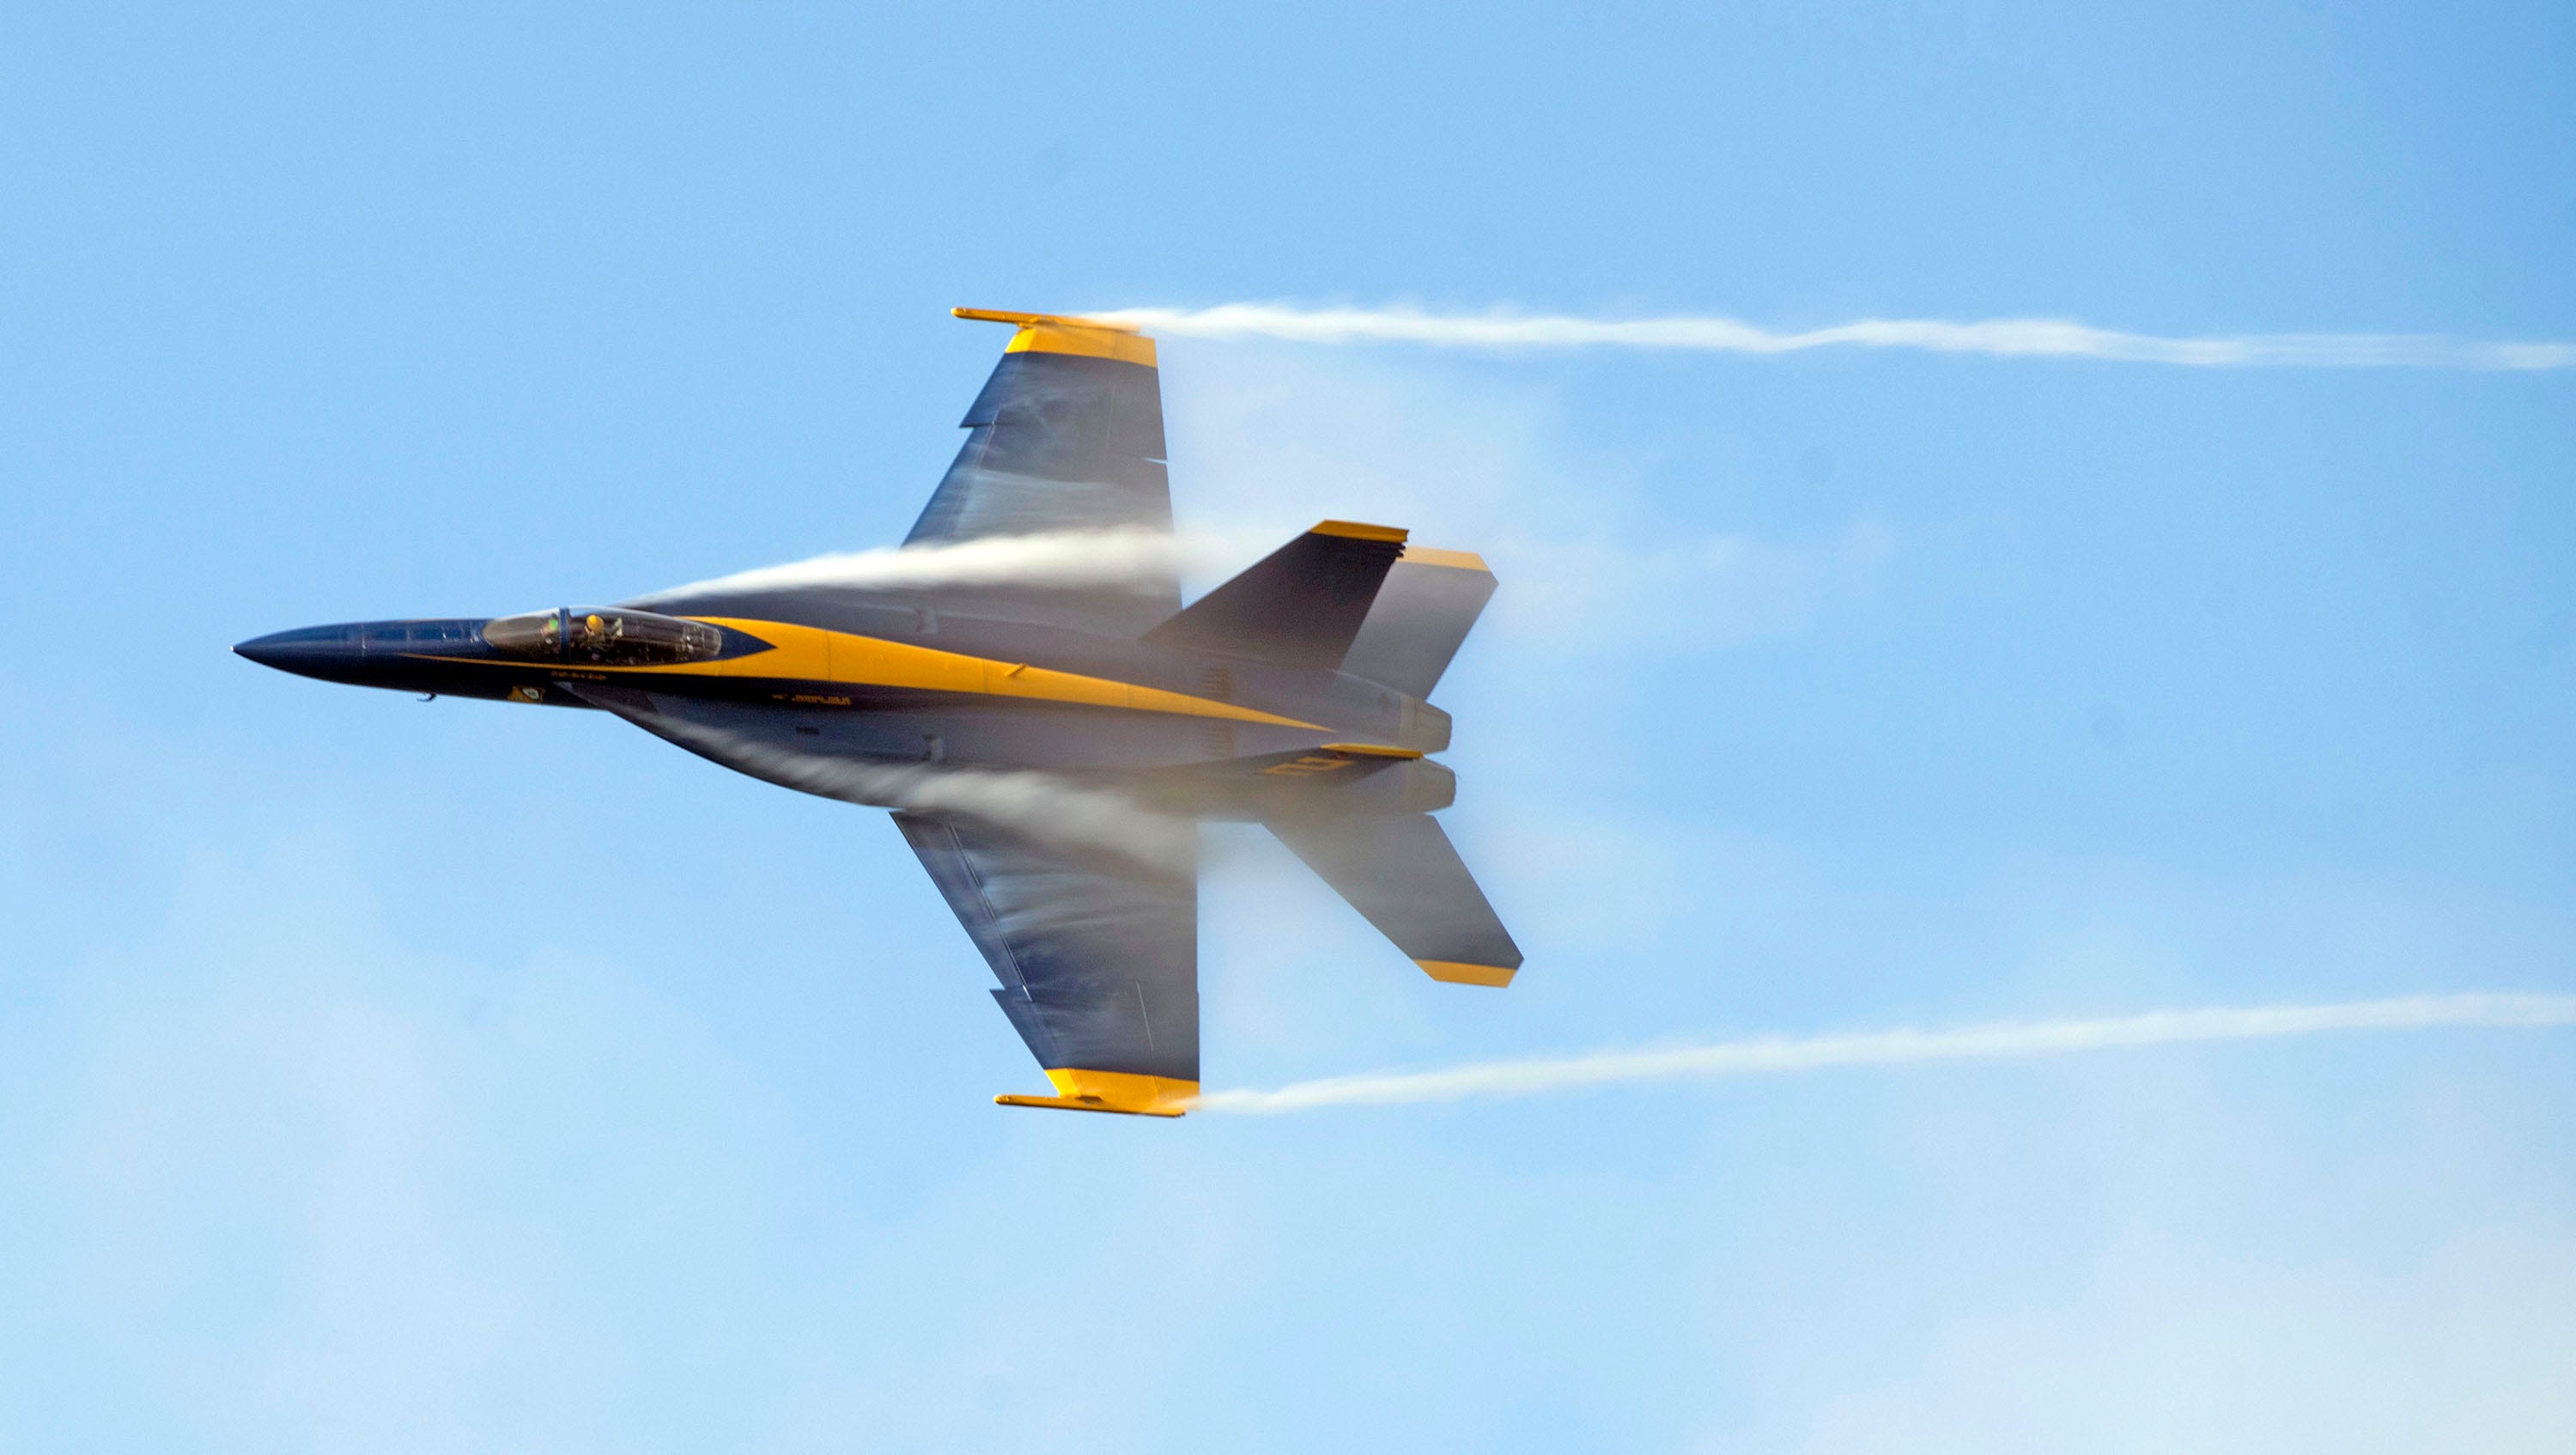 Pensacola Beach Air Show live coverage: Parking lot closed before 7 a.m.